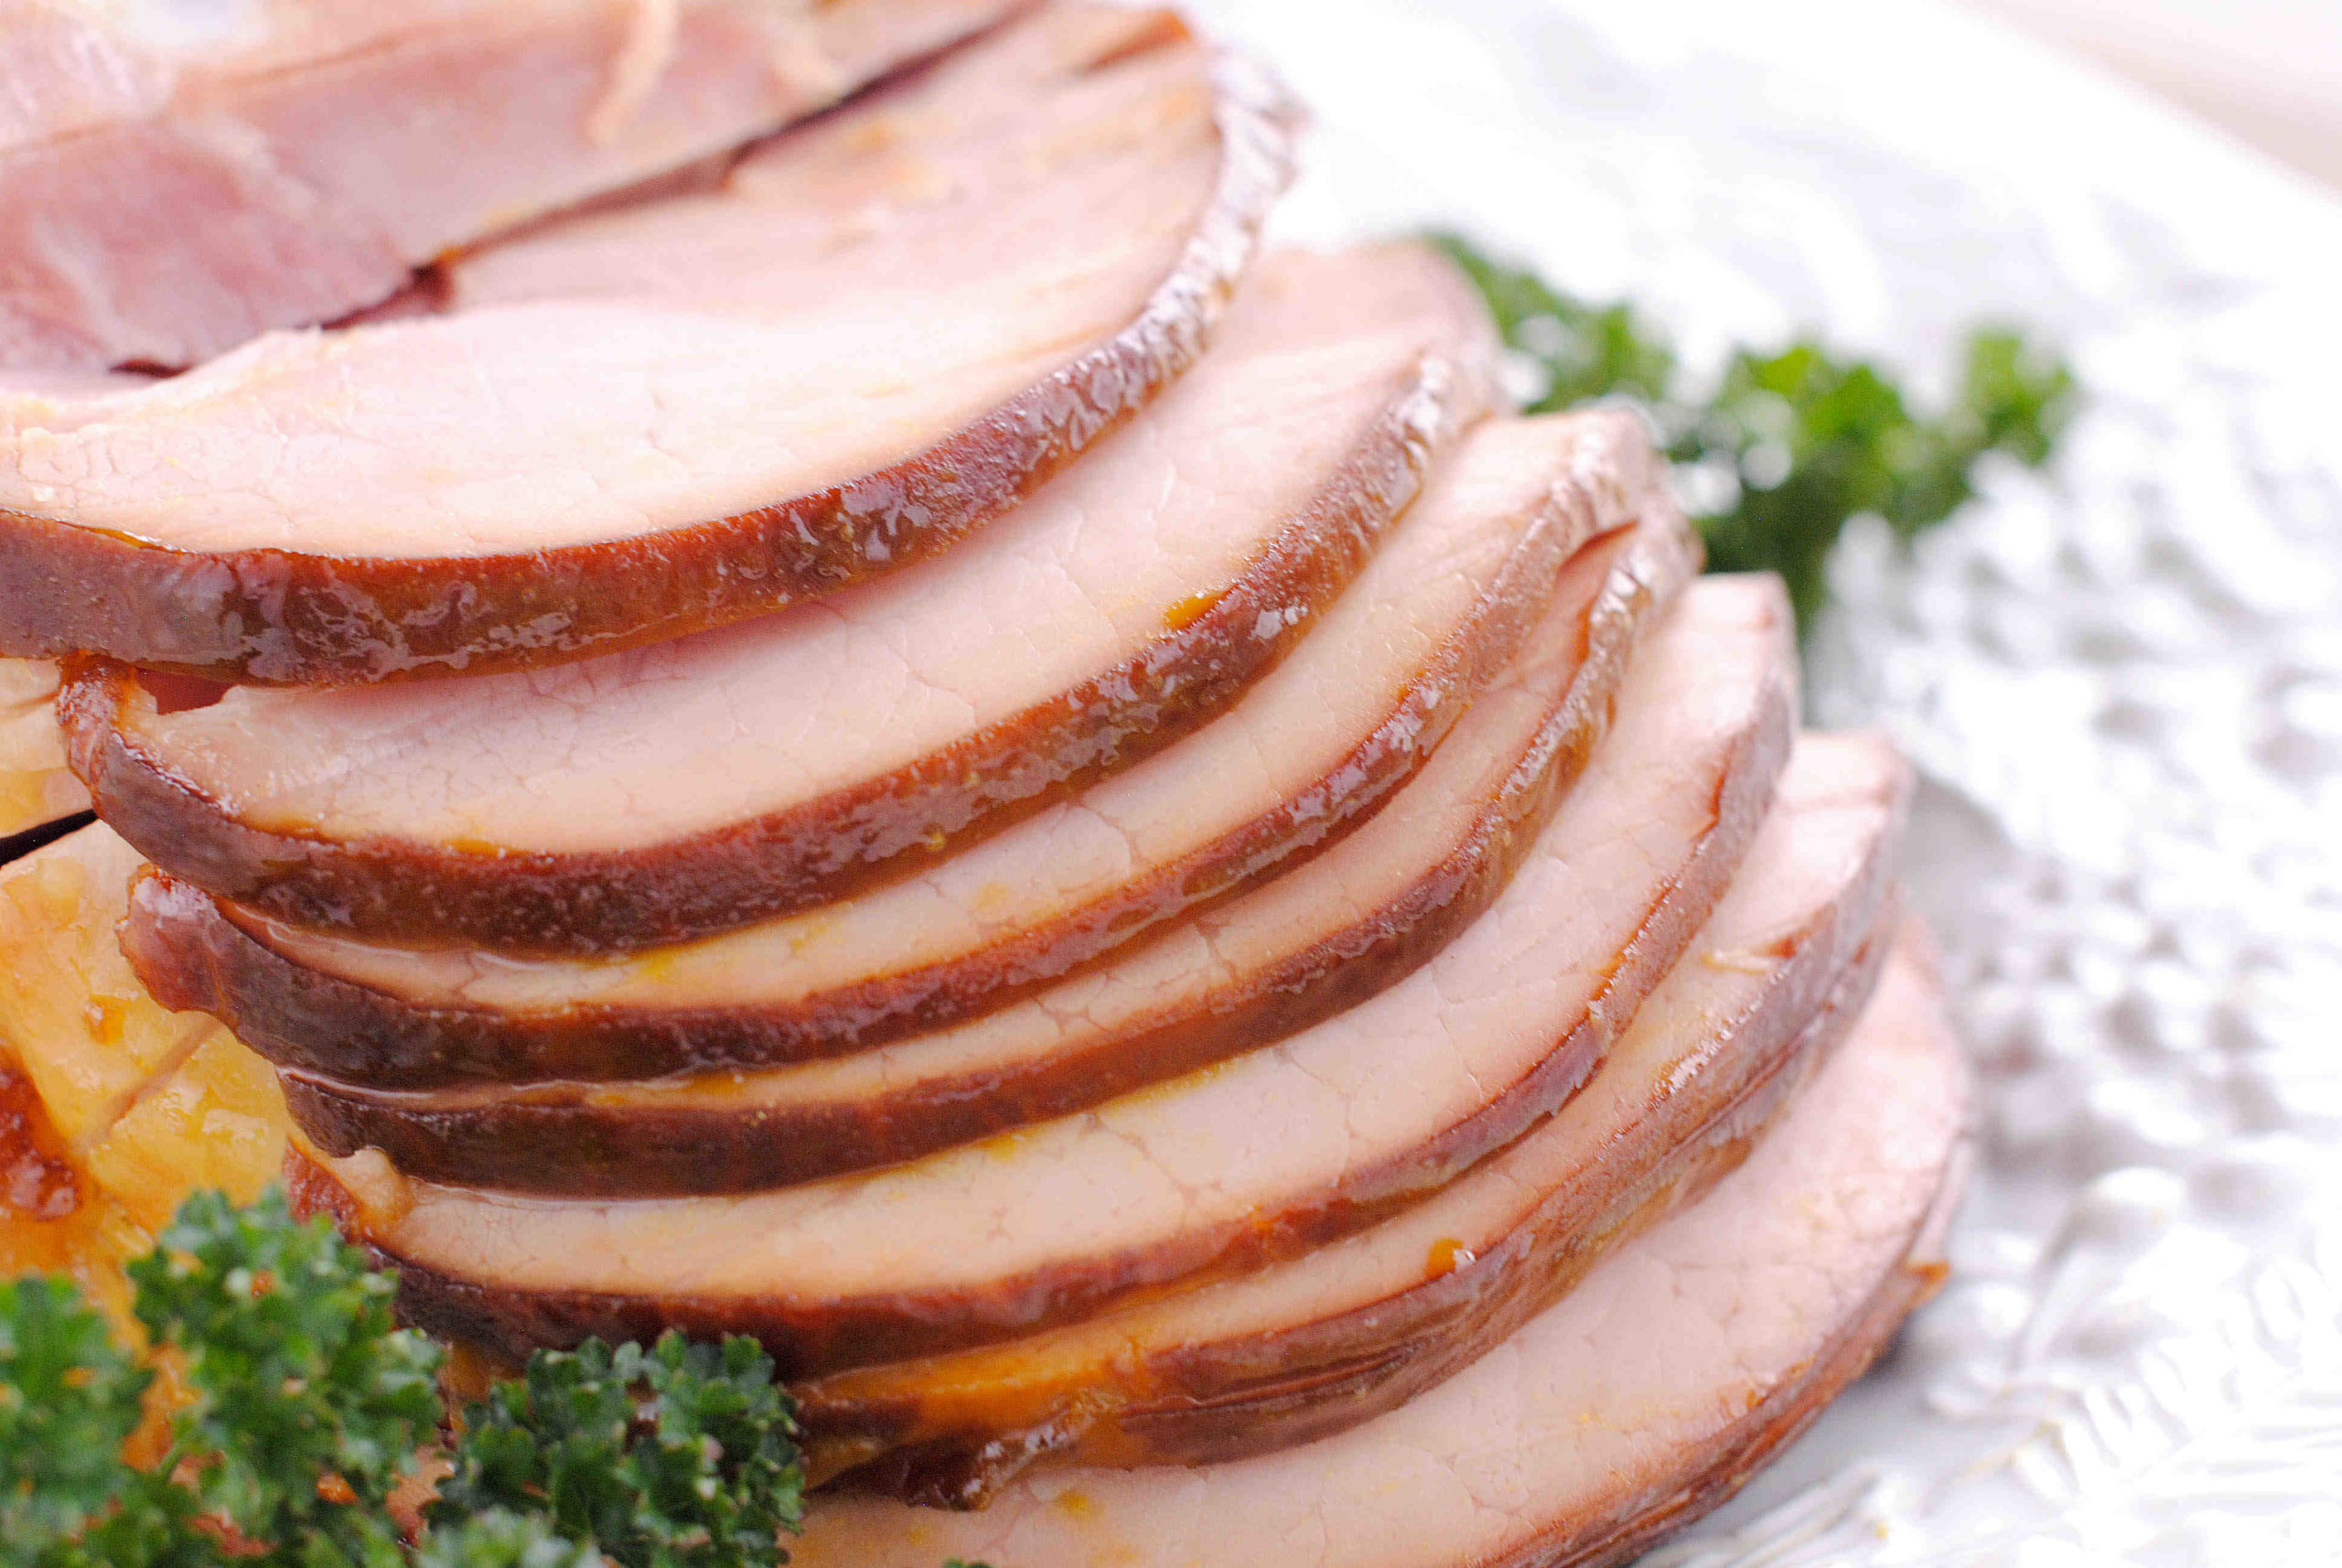 How do you heat up a precooked ham without drying it out?